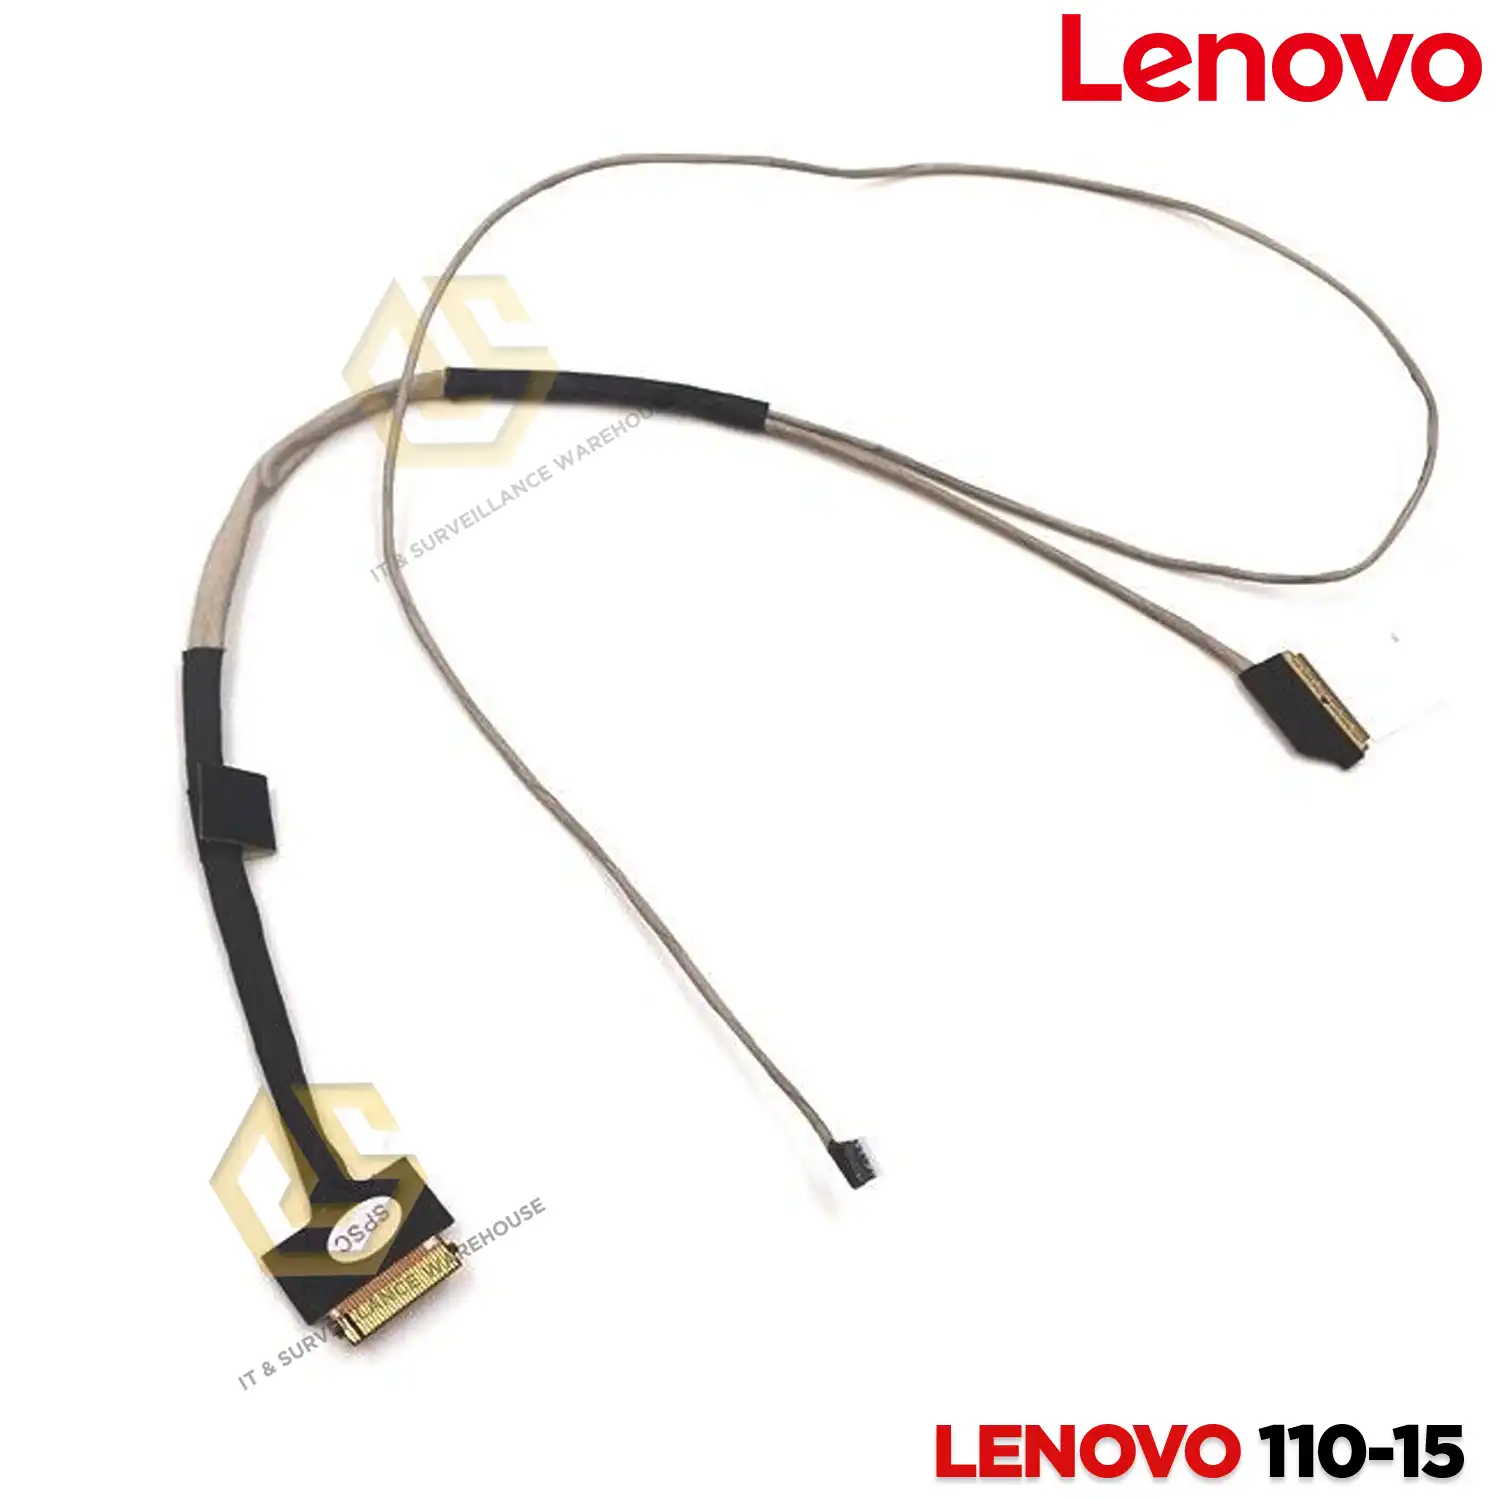 LAPTOP DISPLAY CABLE FOR LENOVO IDEAPAD 110-15 | 110-110-15IBR